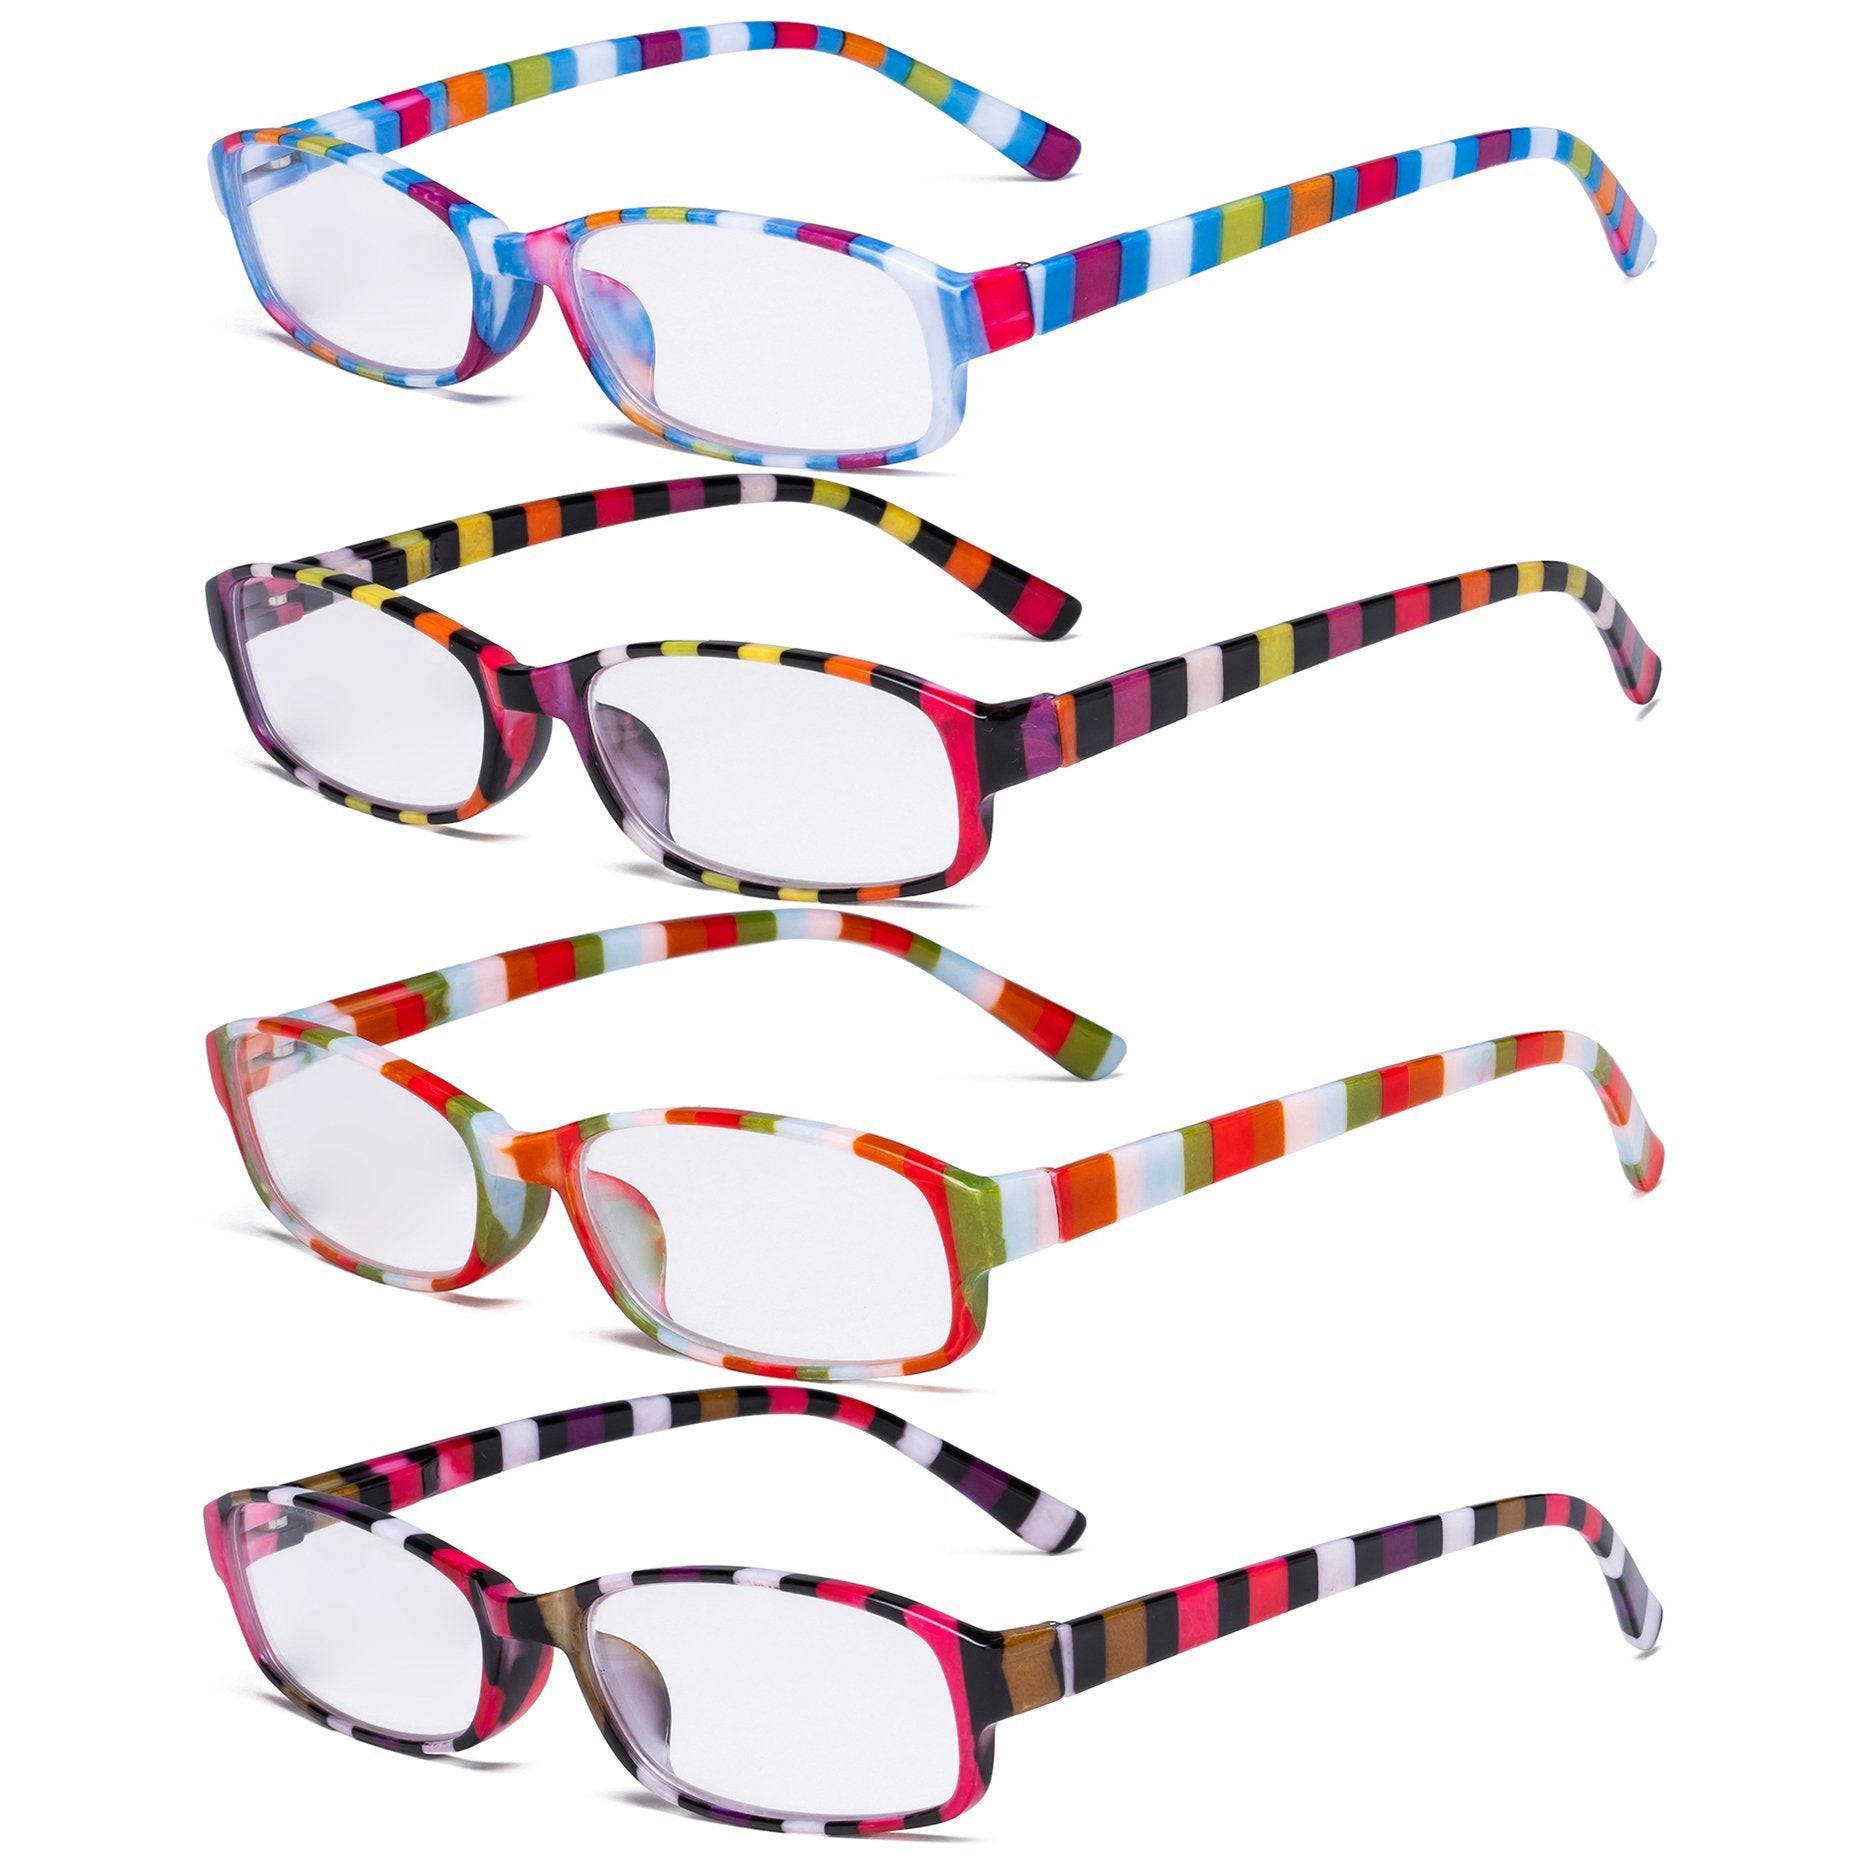 4 Pack Ladies Fashion Reading Glasses with Stripe Arms R908S